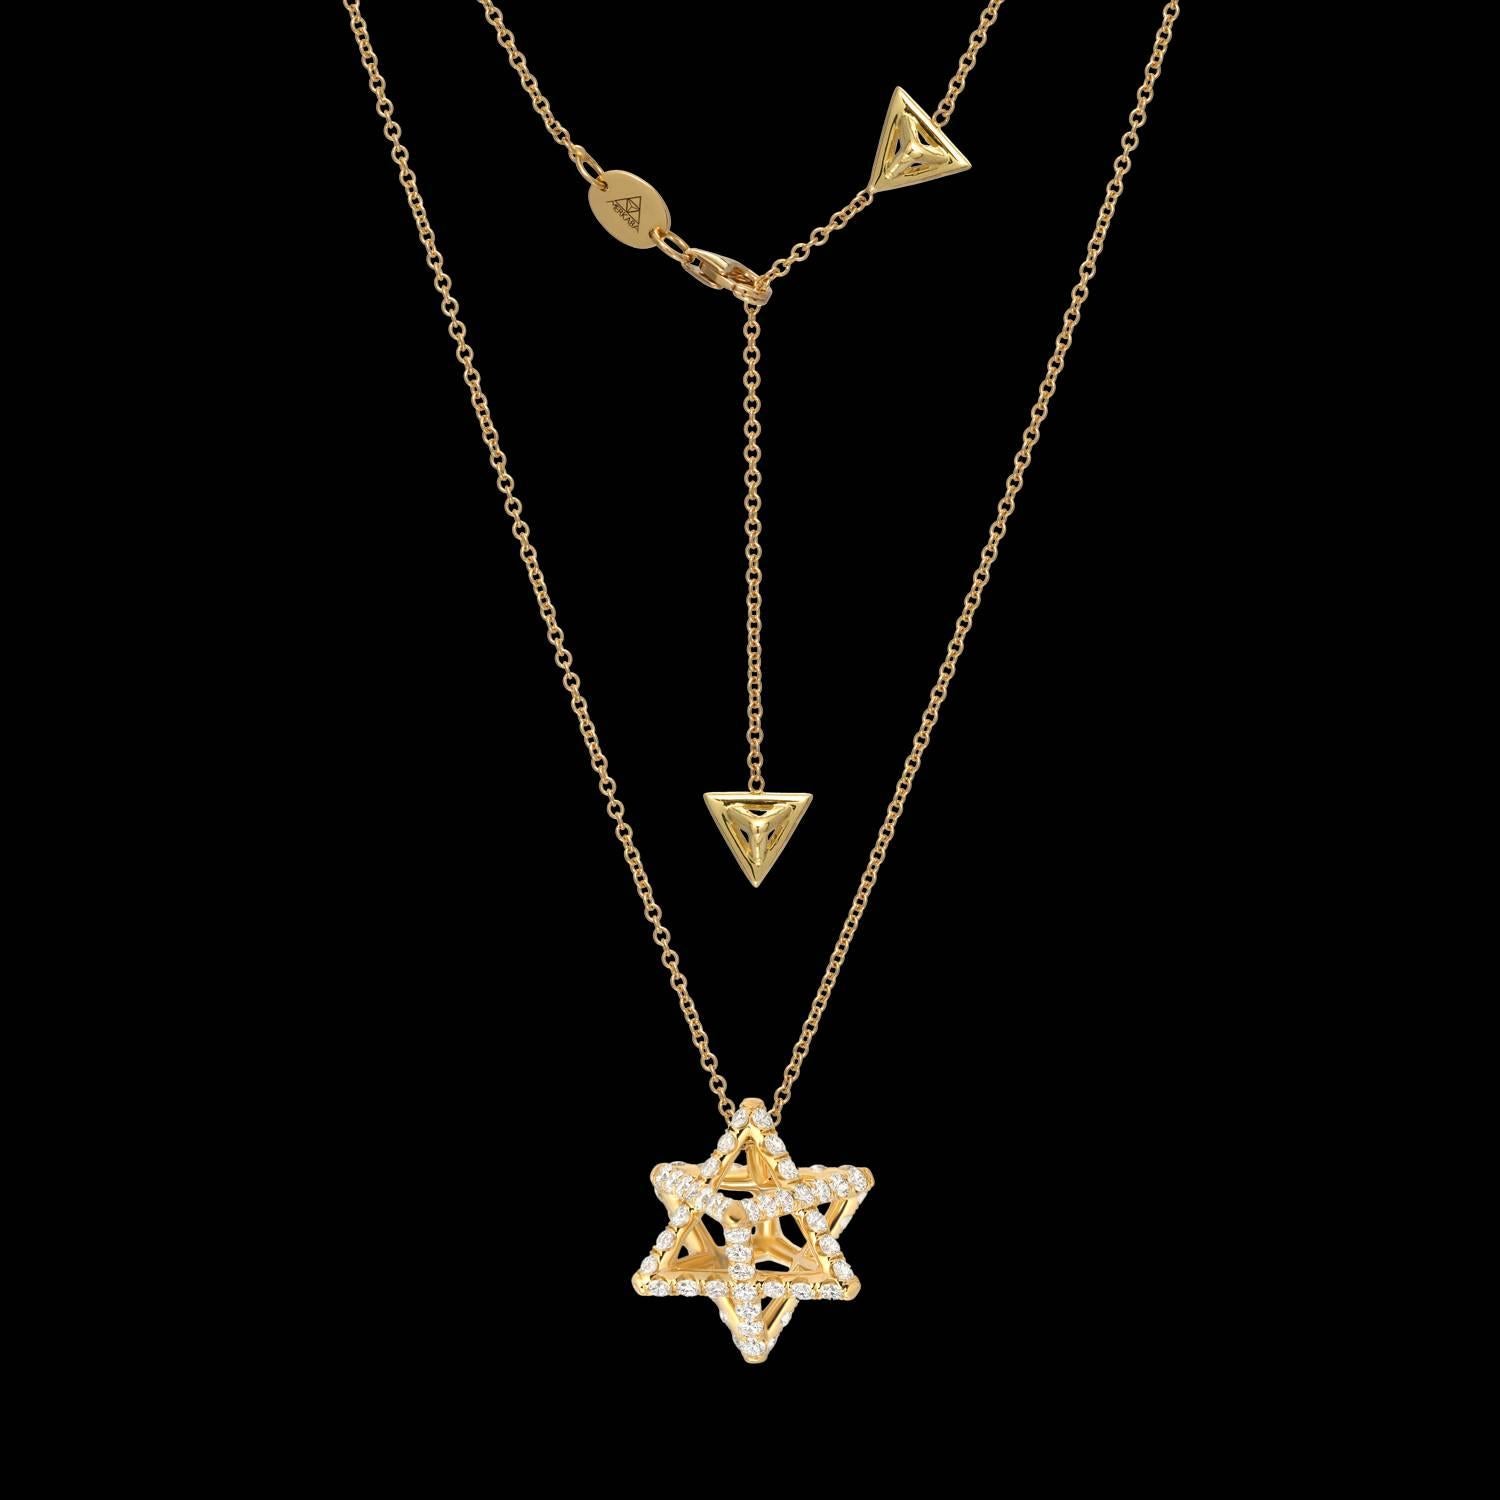 Merkaba 18k yellow gold necklace featuring a total of approximately 1.12 carats of round brilliant diamonds, F-G color and VVS2-VS1 clarity. This heirloom-quality, sacred geometric jewelry piece, suspends elegantly at the chest, measuring 0.68